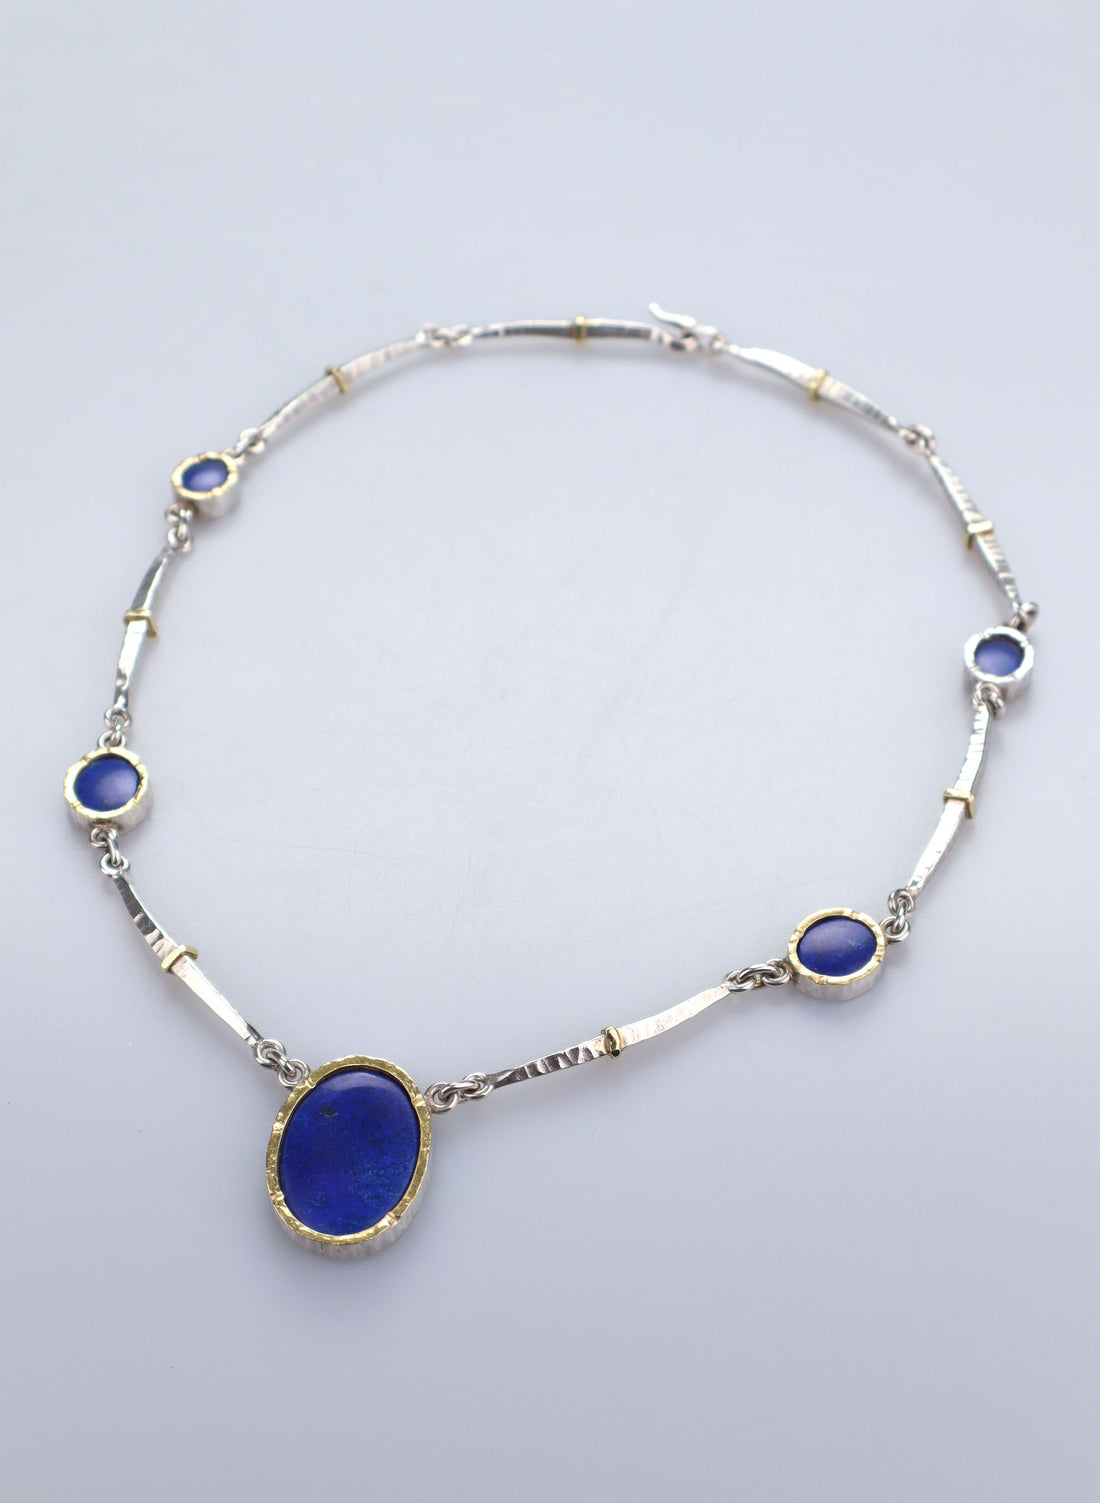 Lapis Lazuli Necklace - 22ct and 18ct